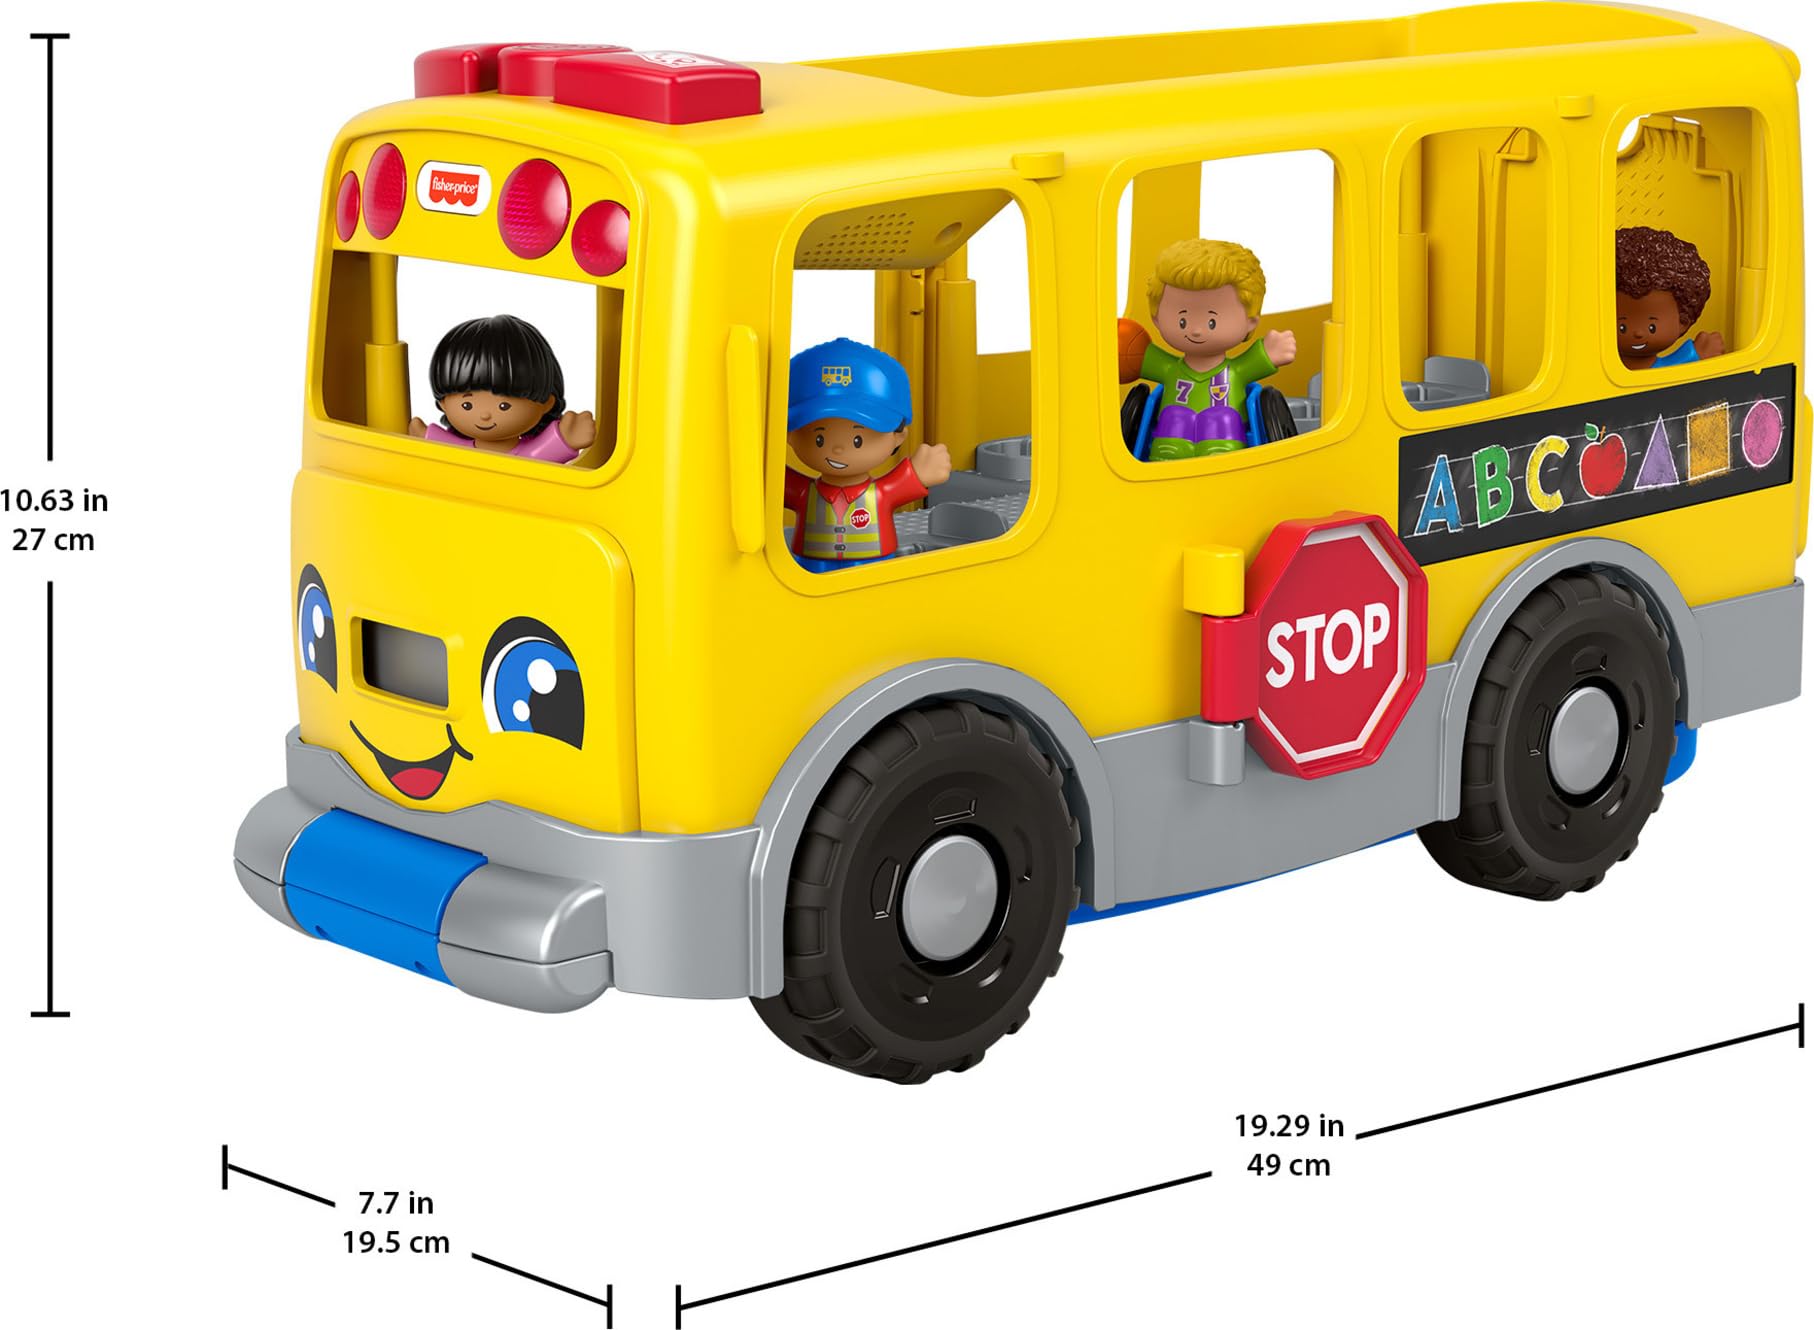 Fisher-Price Little People Toddler Learning Toy Big Yellow School Bus With Lights Sounds & Smart Stages, 4 Figures, Ages 1+ Years